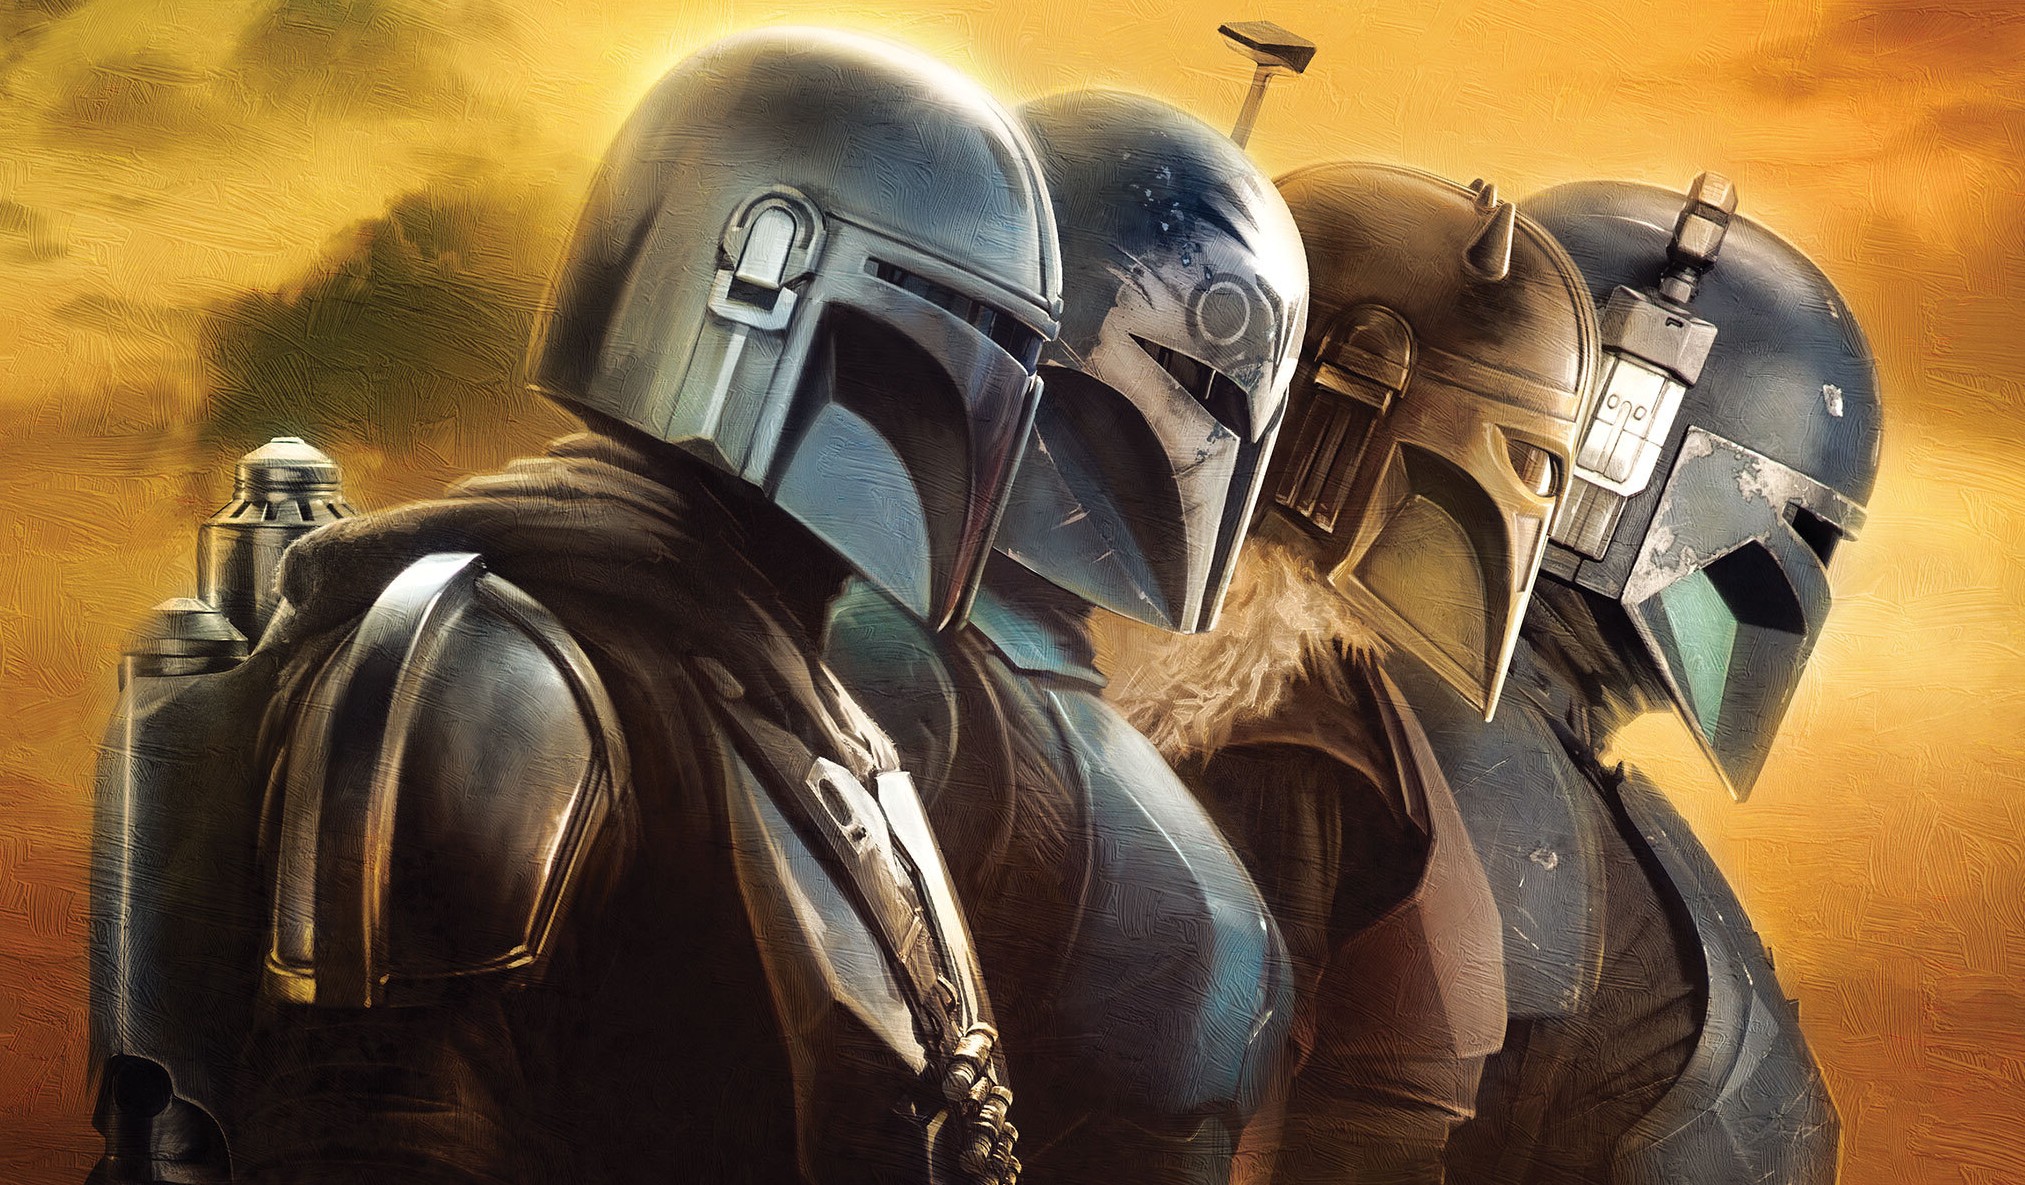 The Mandalorian season 3, episode 1 release date, time, channel, and plot